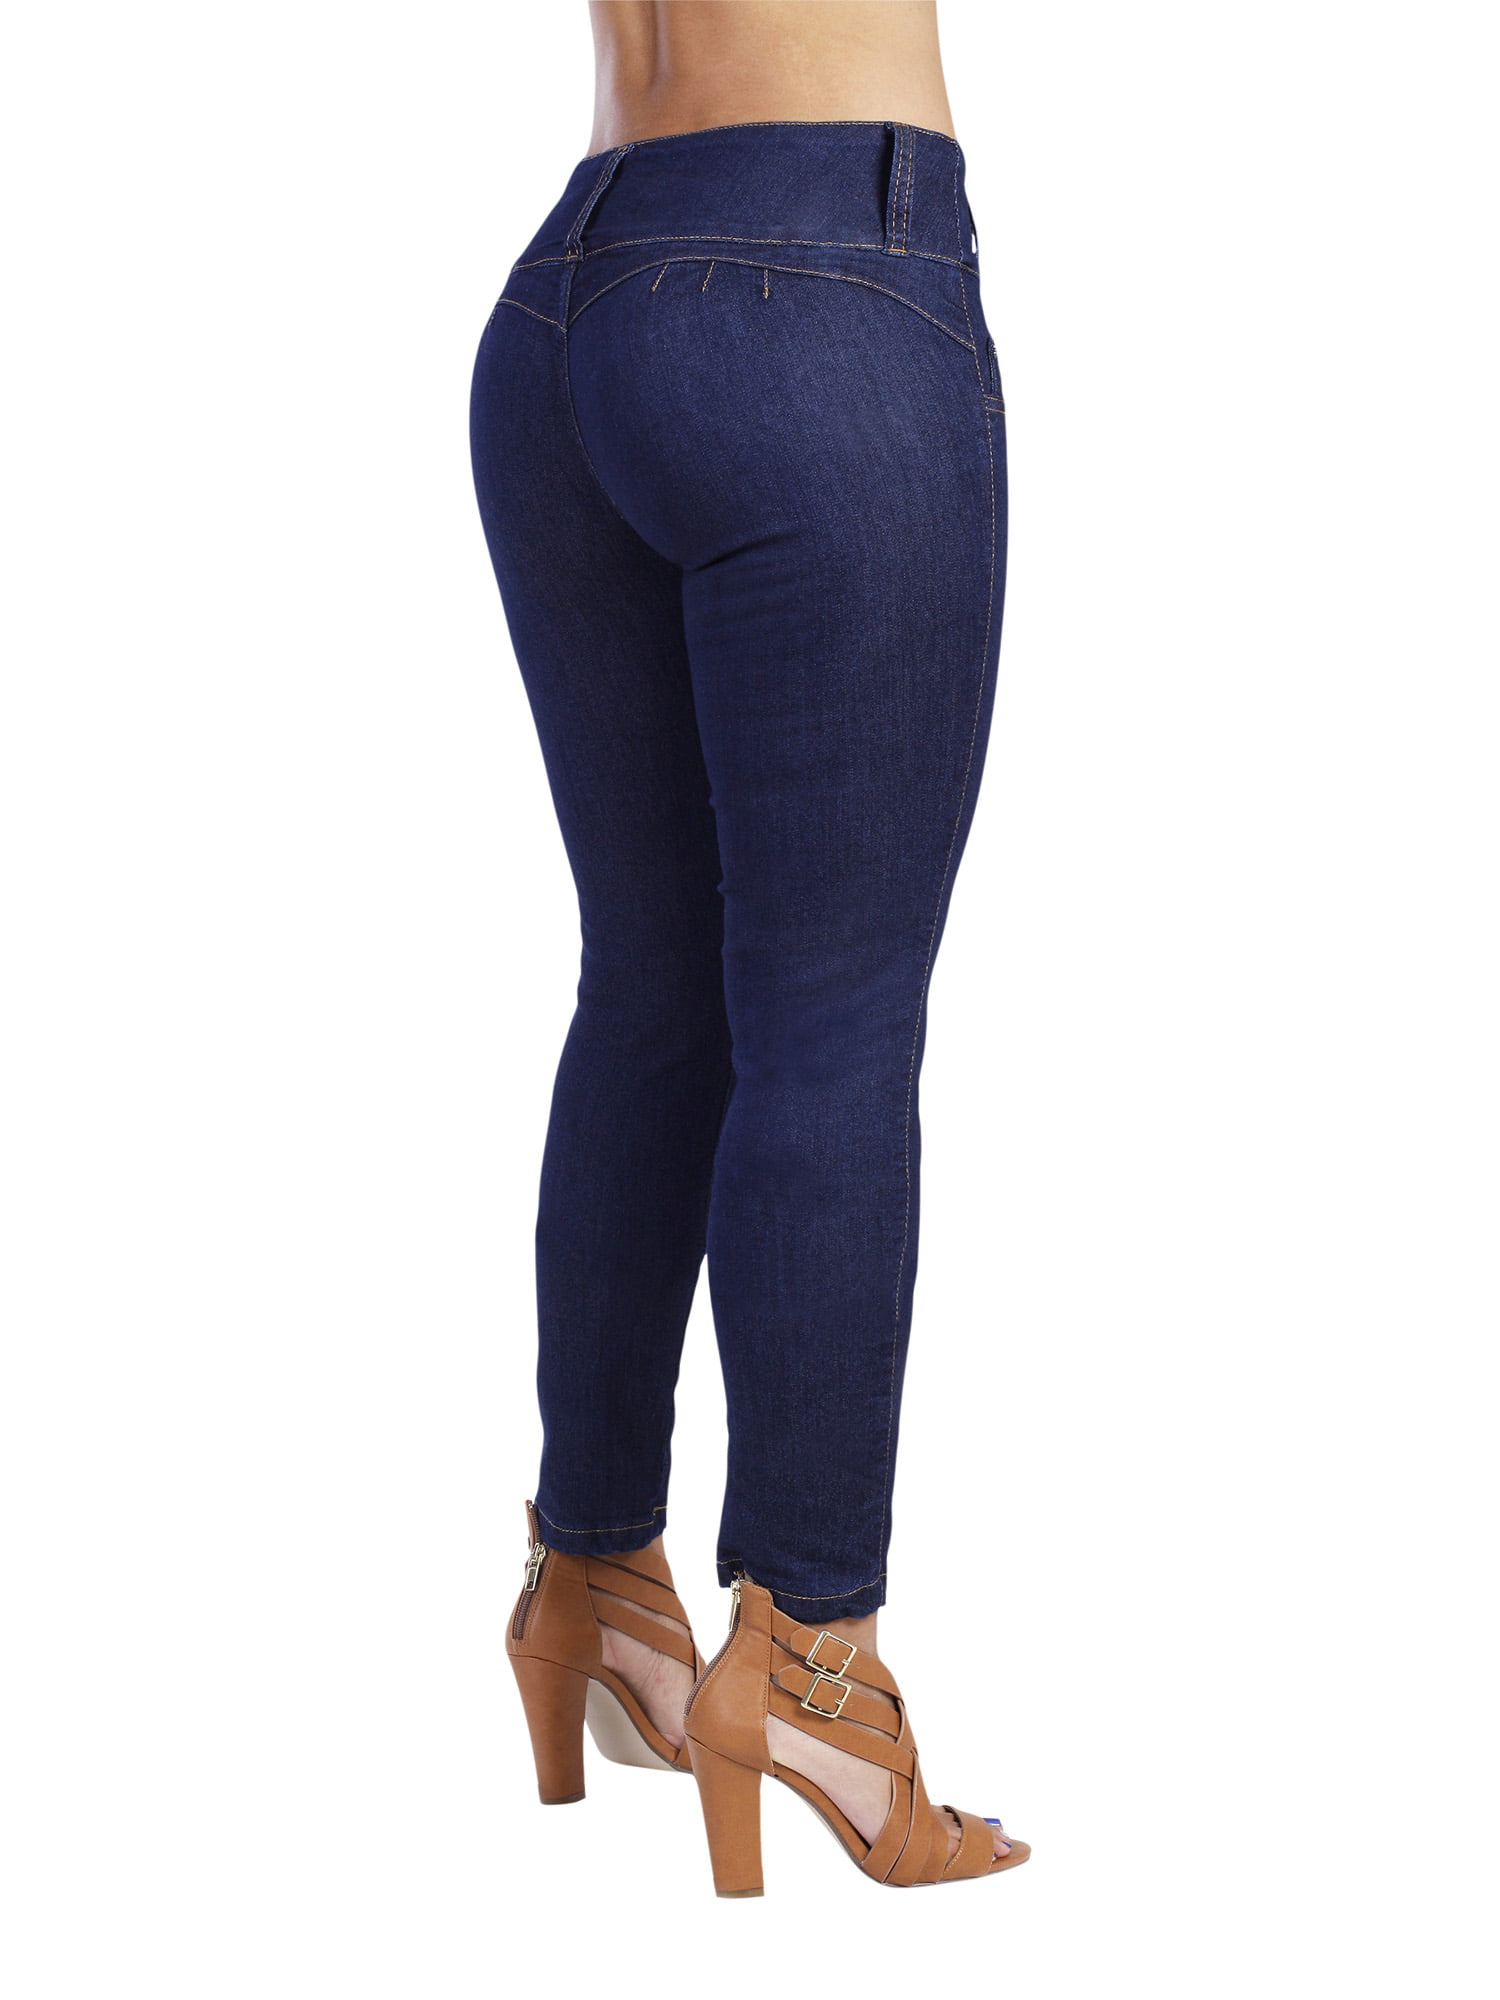 Curvify 764 Women's Butt-Lifting Skinny Jeans  High-Rise Waist, Brazilian  Style FADED WASHED 3 